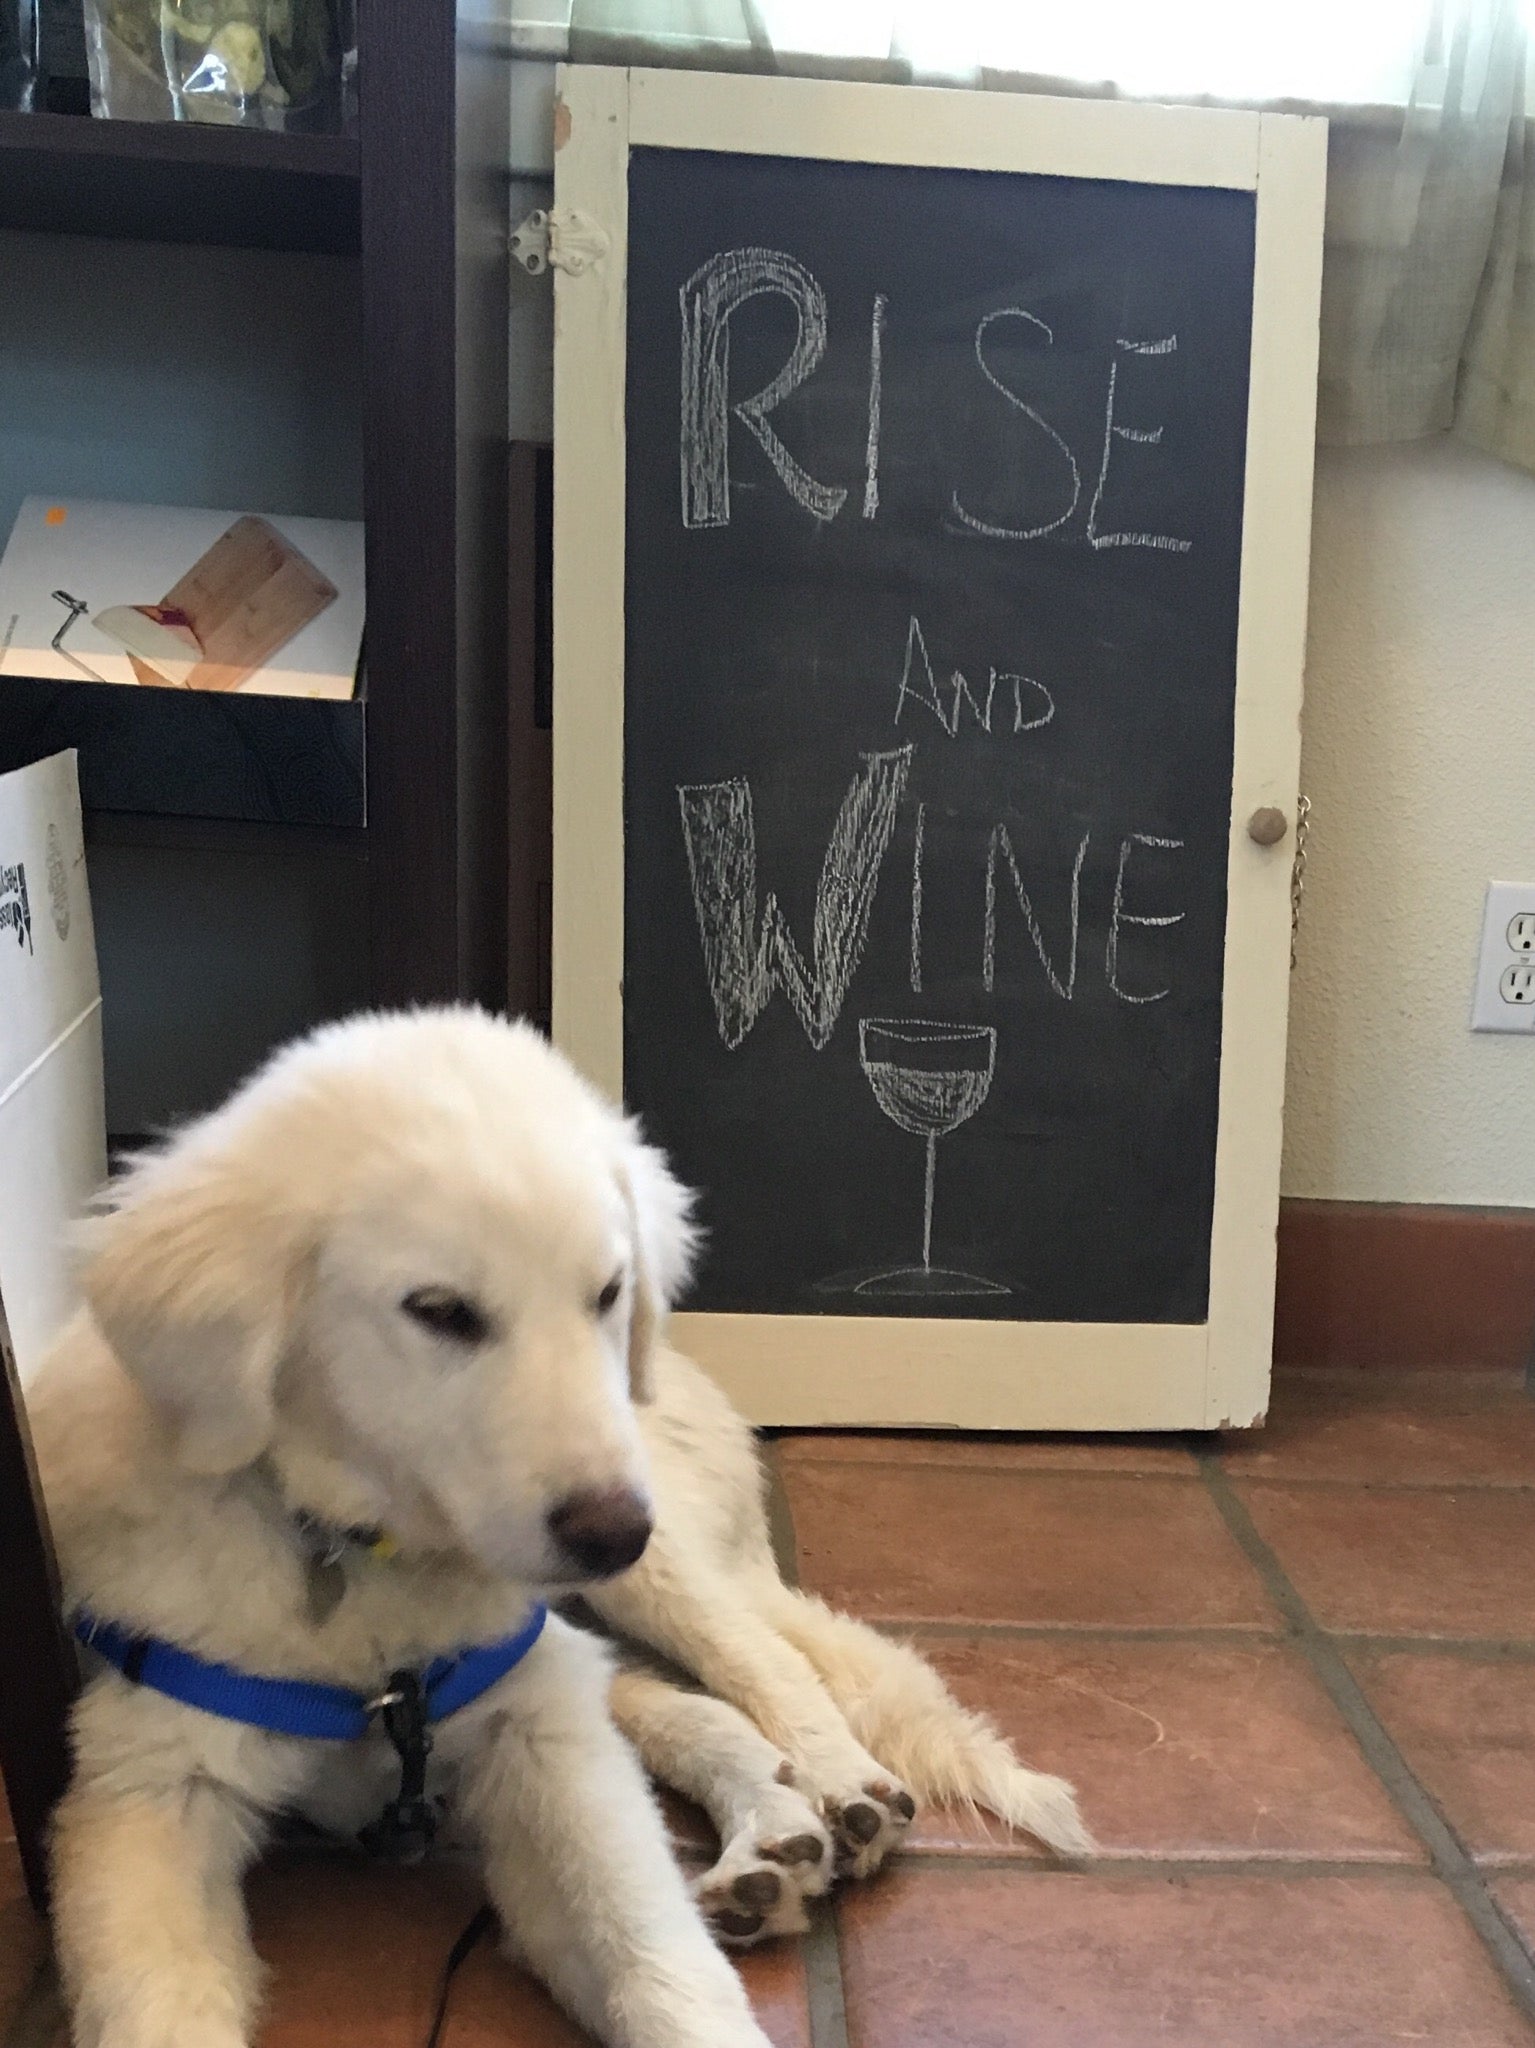 Meet Max, our new winery puppy